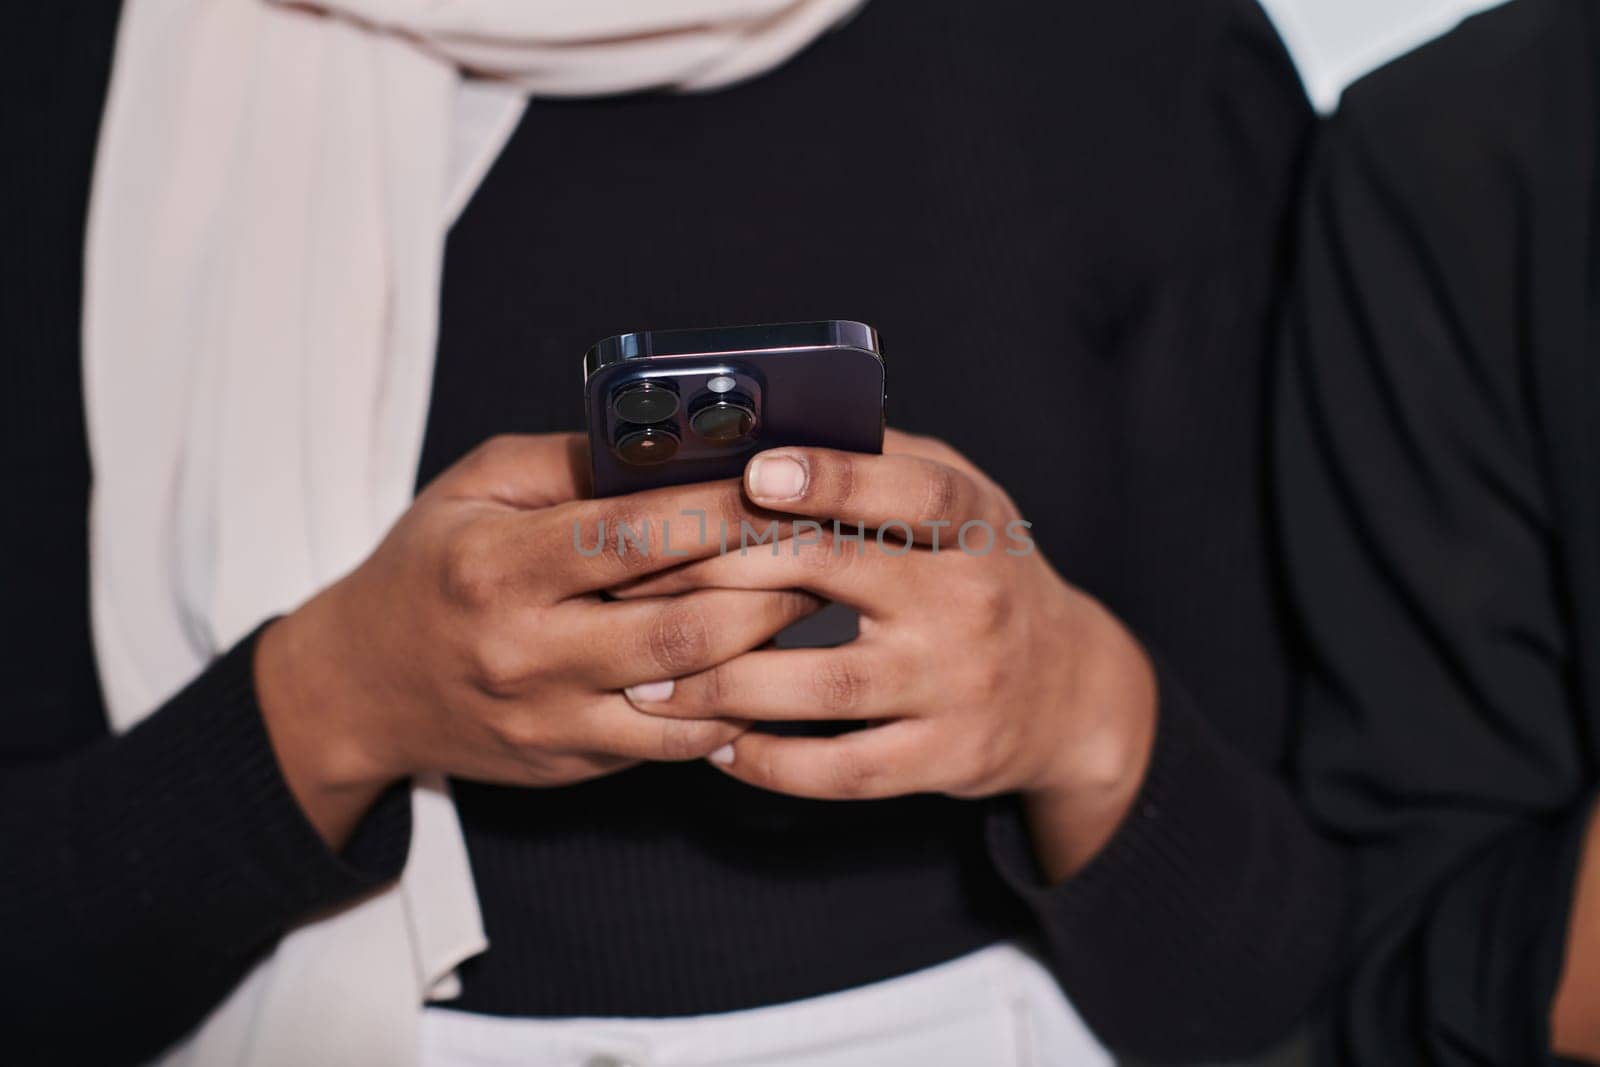 Captured in a close-up moment, a girl in hijab skillfully engages with her smartphone, reflecting a contemporary lifestyle where digital connectivity seamlessly intertwines with cultural expression, showcasing the empowerment and diversity embodied in modern technology usage by dotshock